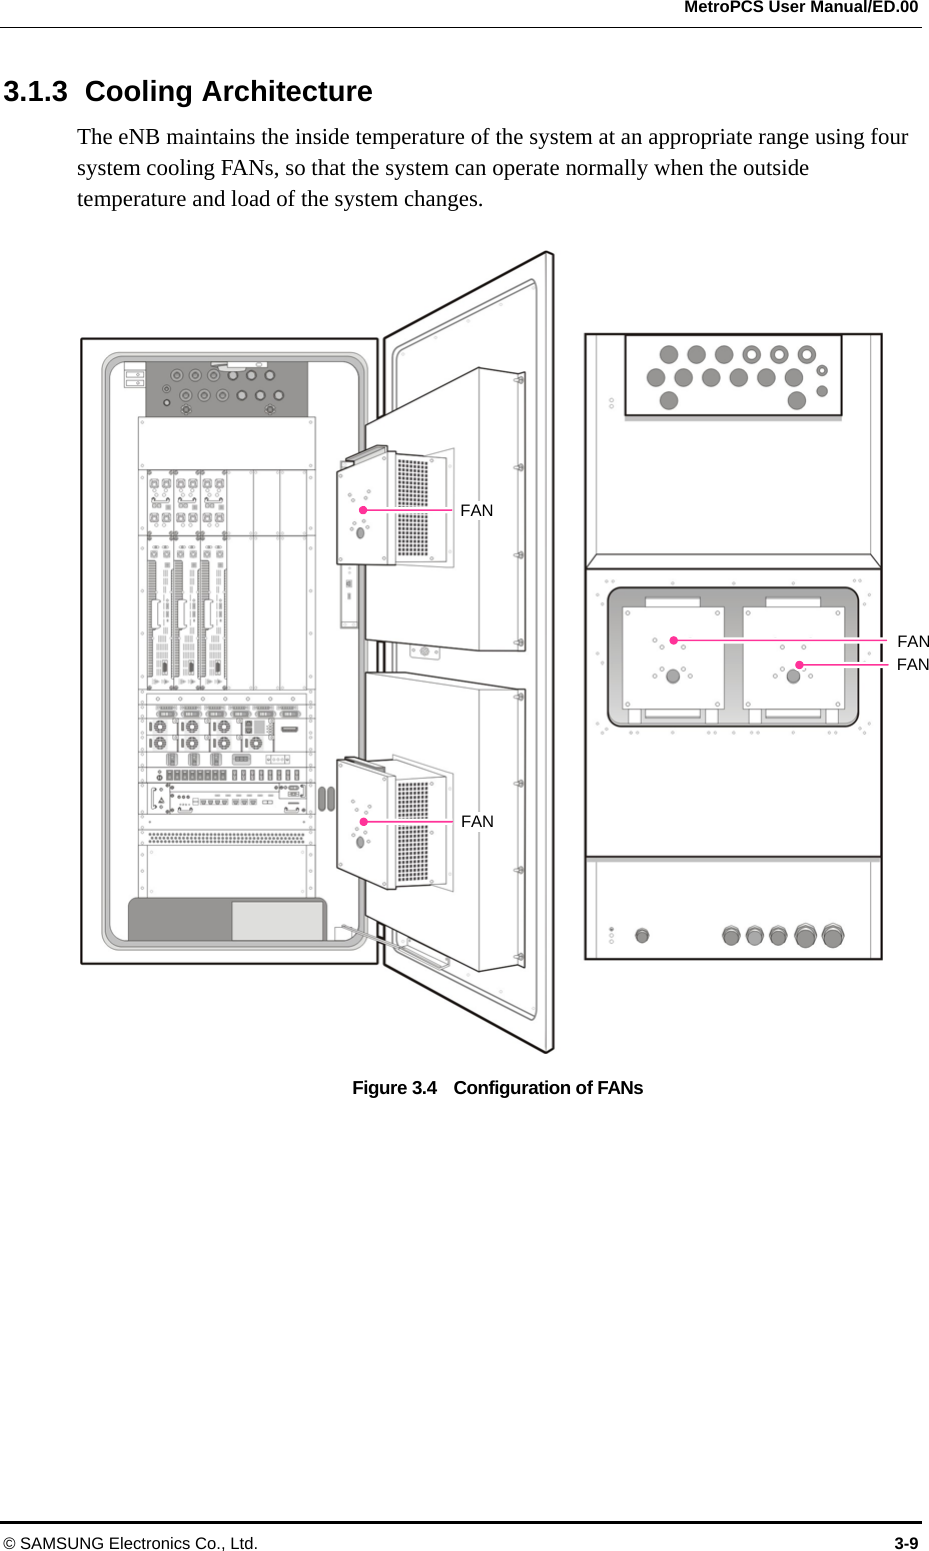  MetroPCS User Manual/ED.00 © SAMSUNG Electronics Co., Ltd.  3-9 3.1.3 Cooling Architecture The eNB maintains the inside temperature of the system at an appropriate range using four system cooling FANs, so that the system can operate normally when the outside temperature and load of the system changes.  Figure 3.4    Configuration of FANs FAN FAN FAN FAN 